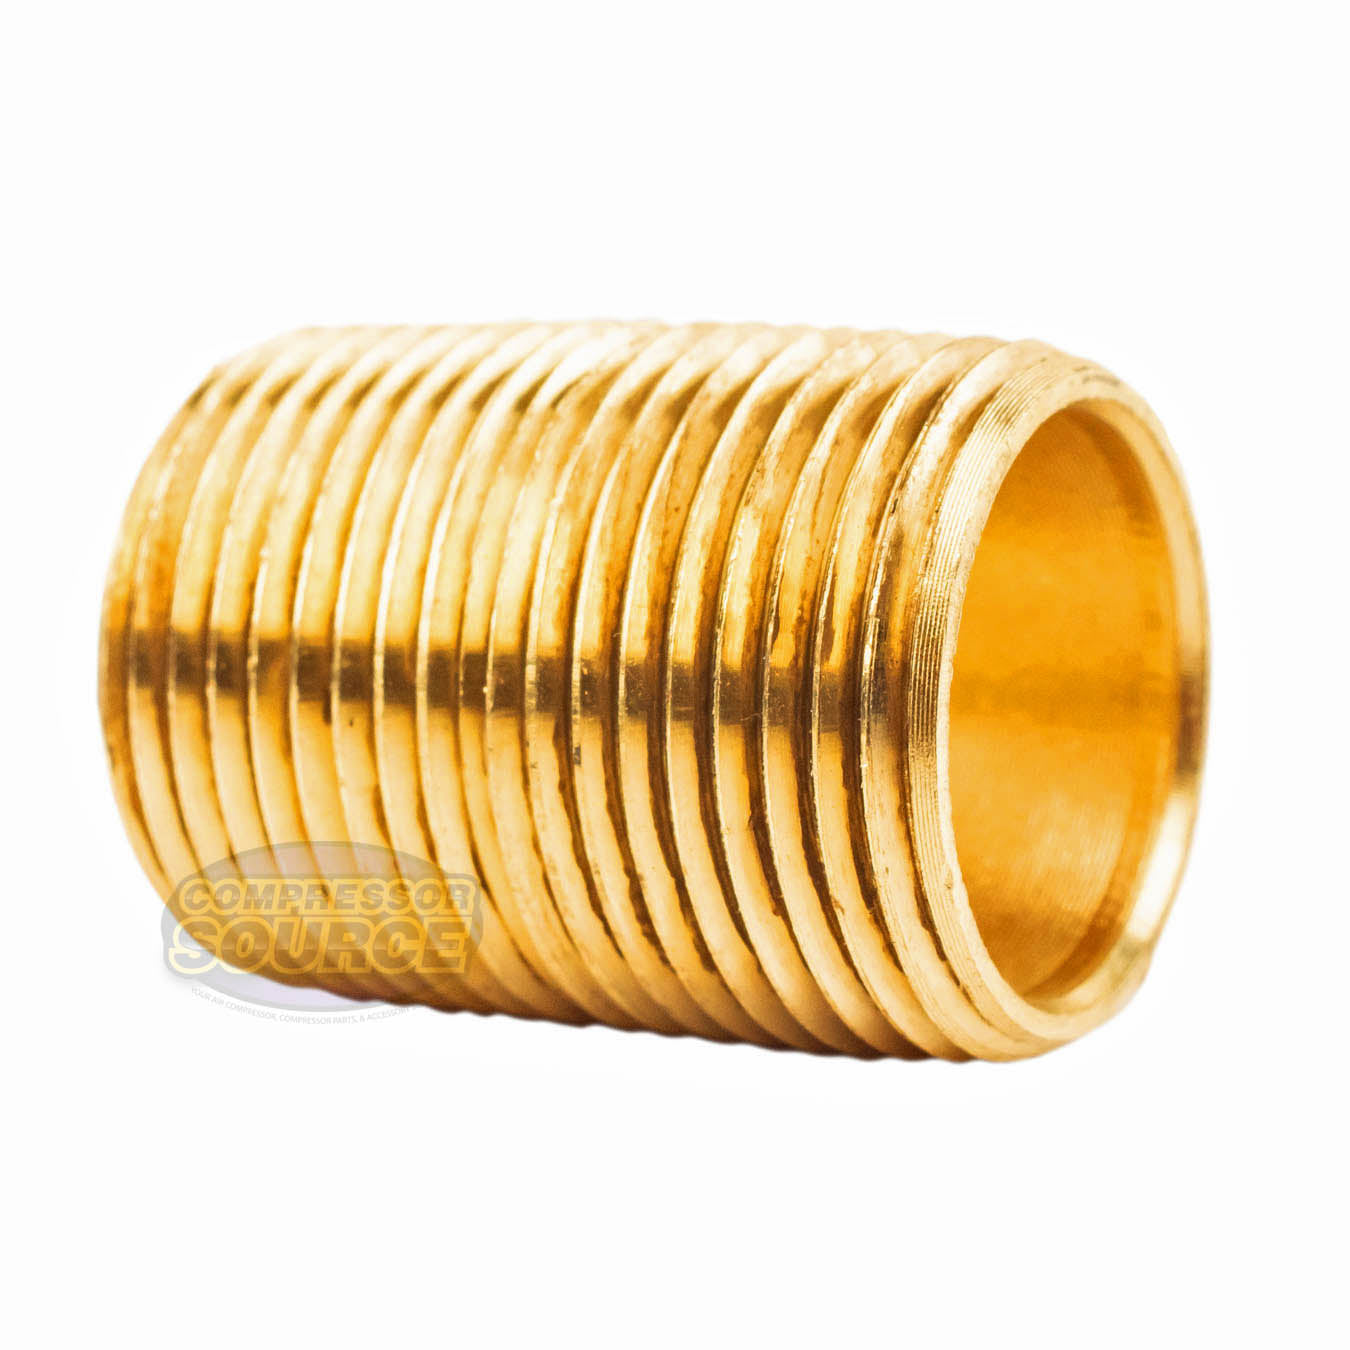 5 Pack 3/4" NPT X Male Close Pipe Nipple Threaded Brass Fitting Pipe Connector